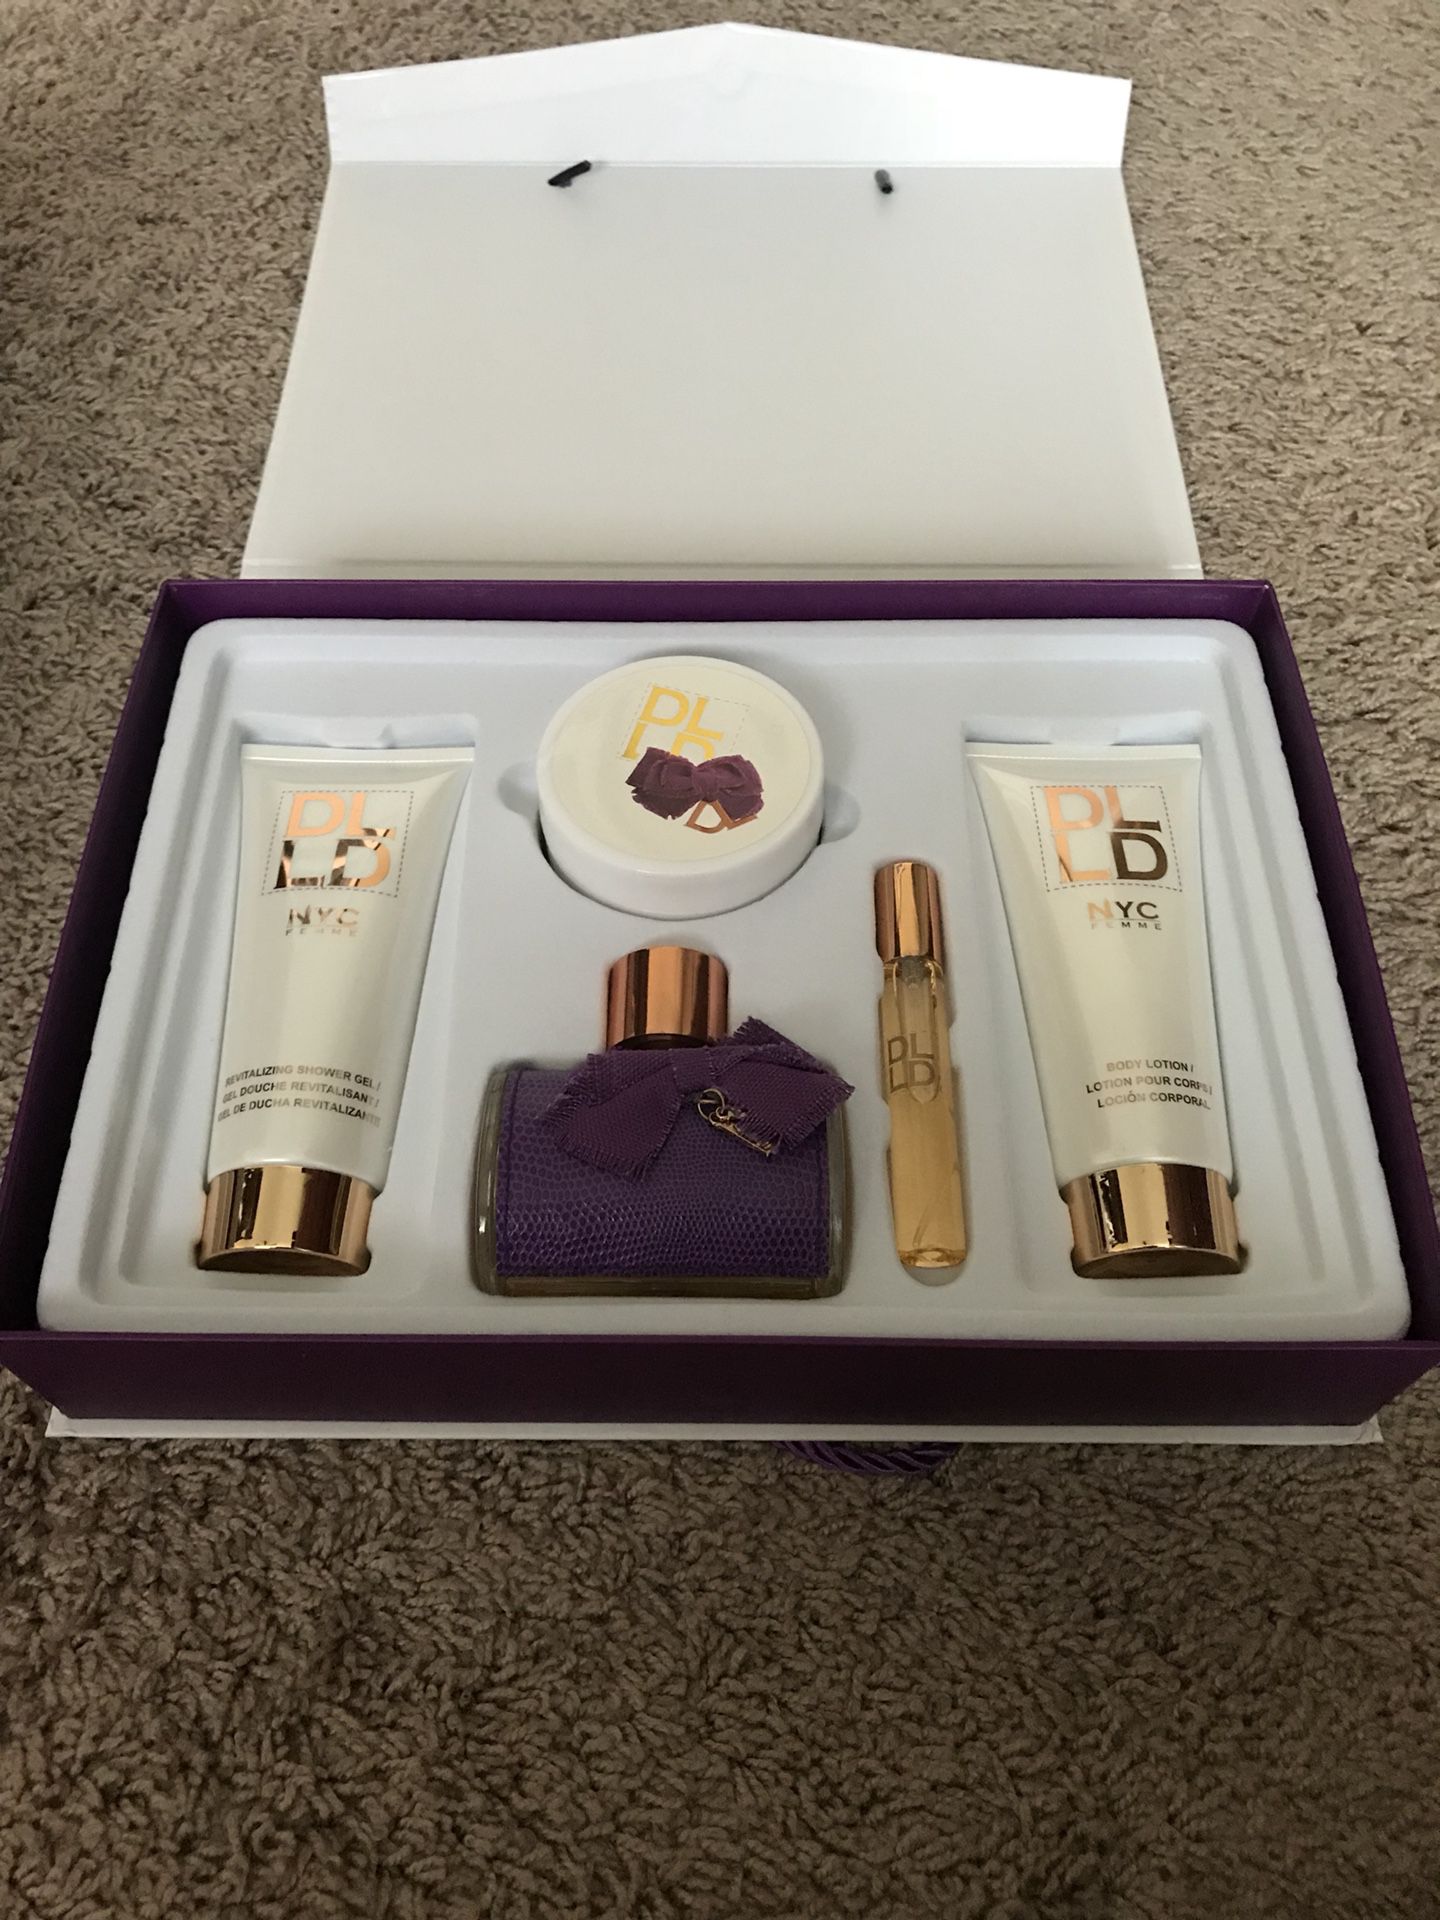 DLLD NYC Perfume and creams kit for Sale in Cape Coral, FL - OfferUp